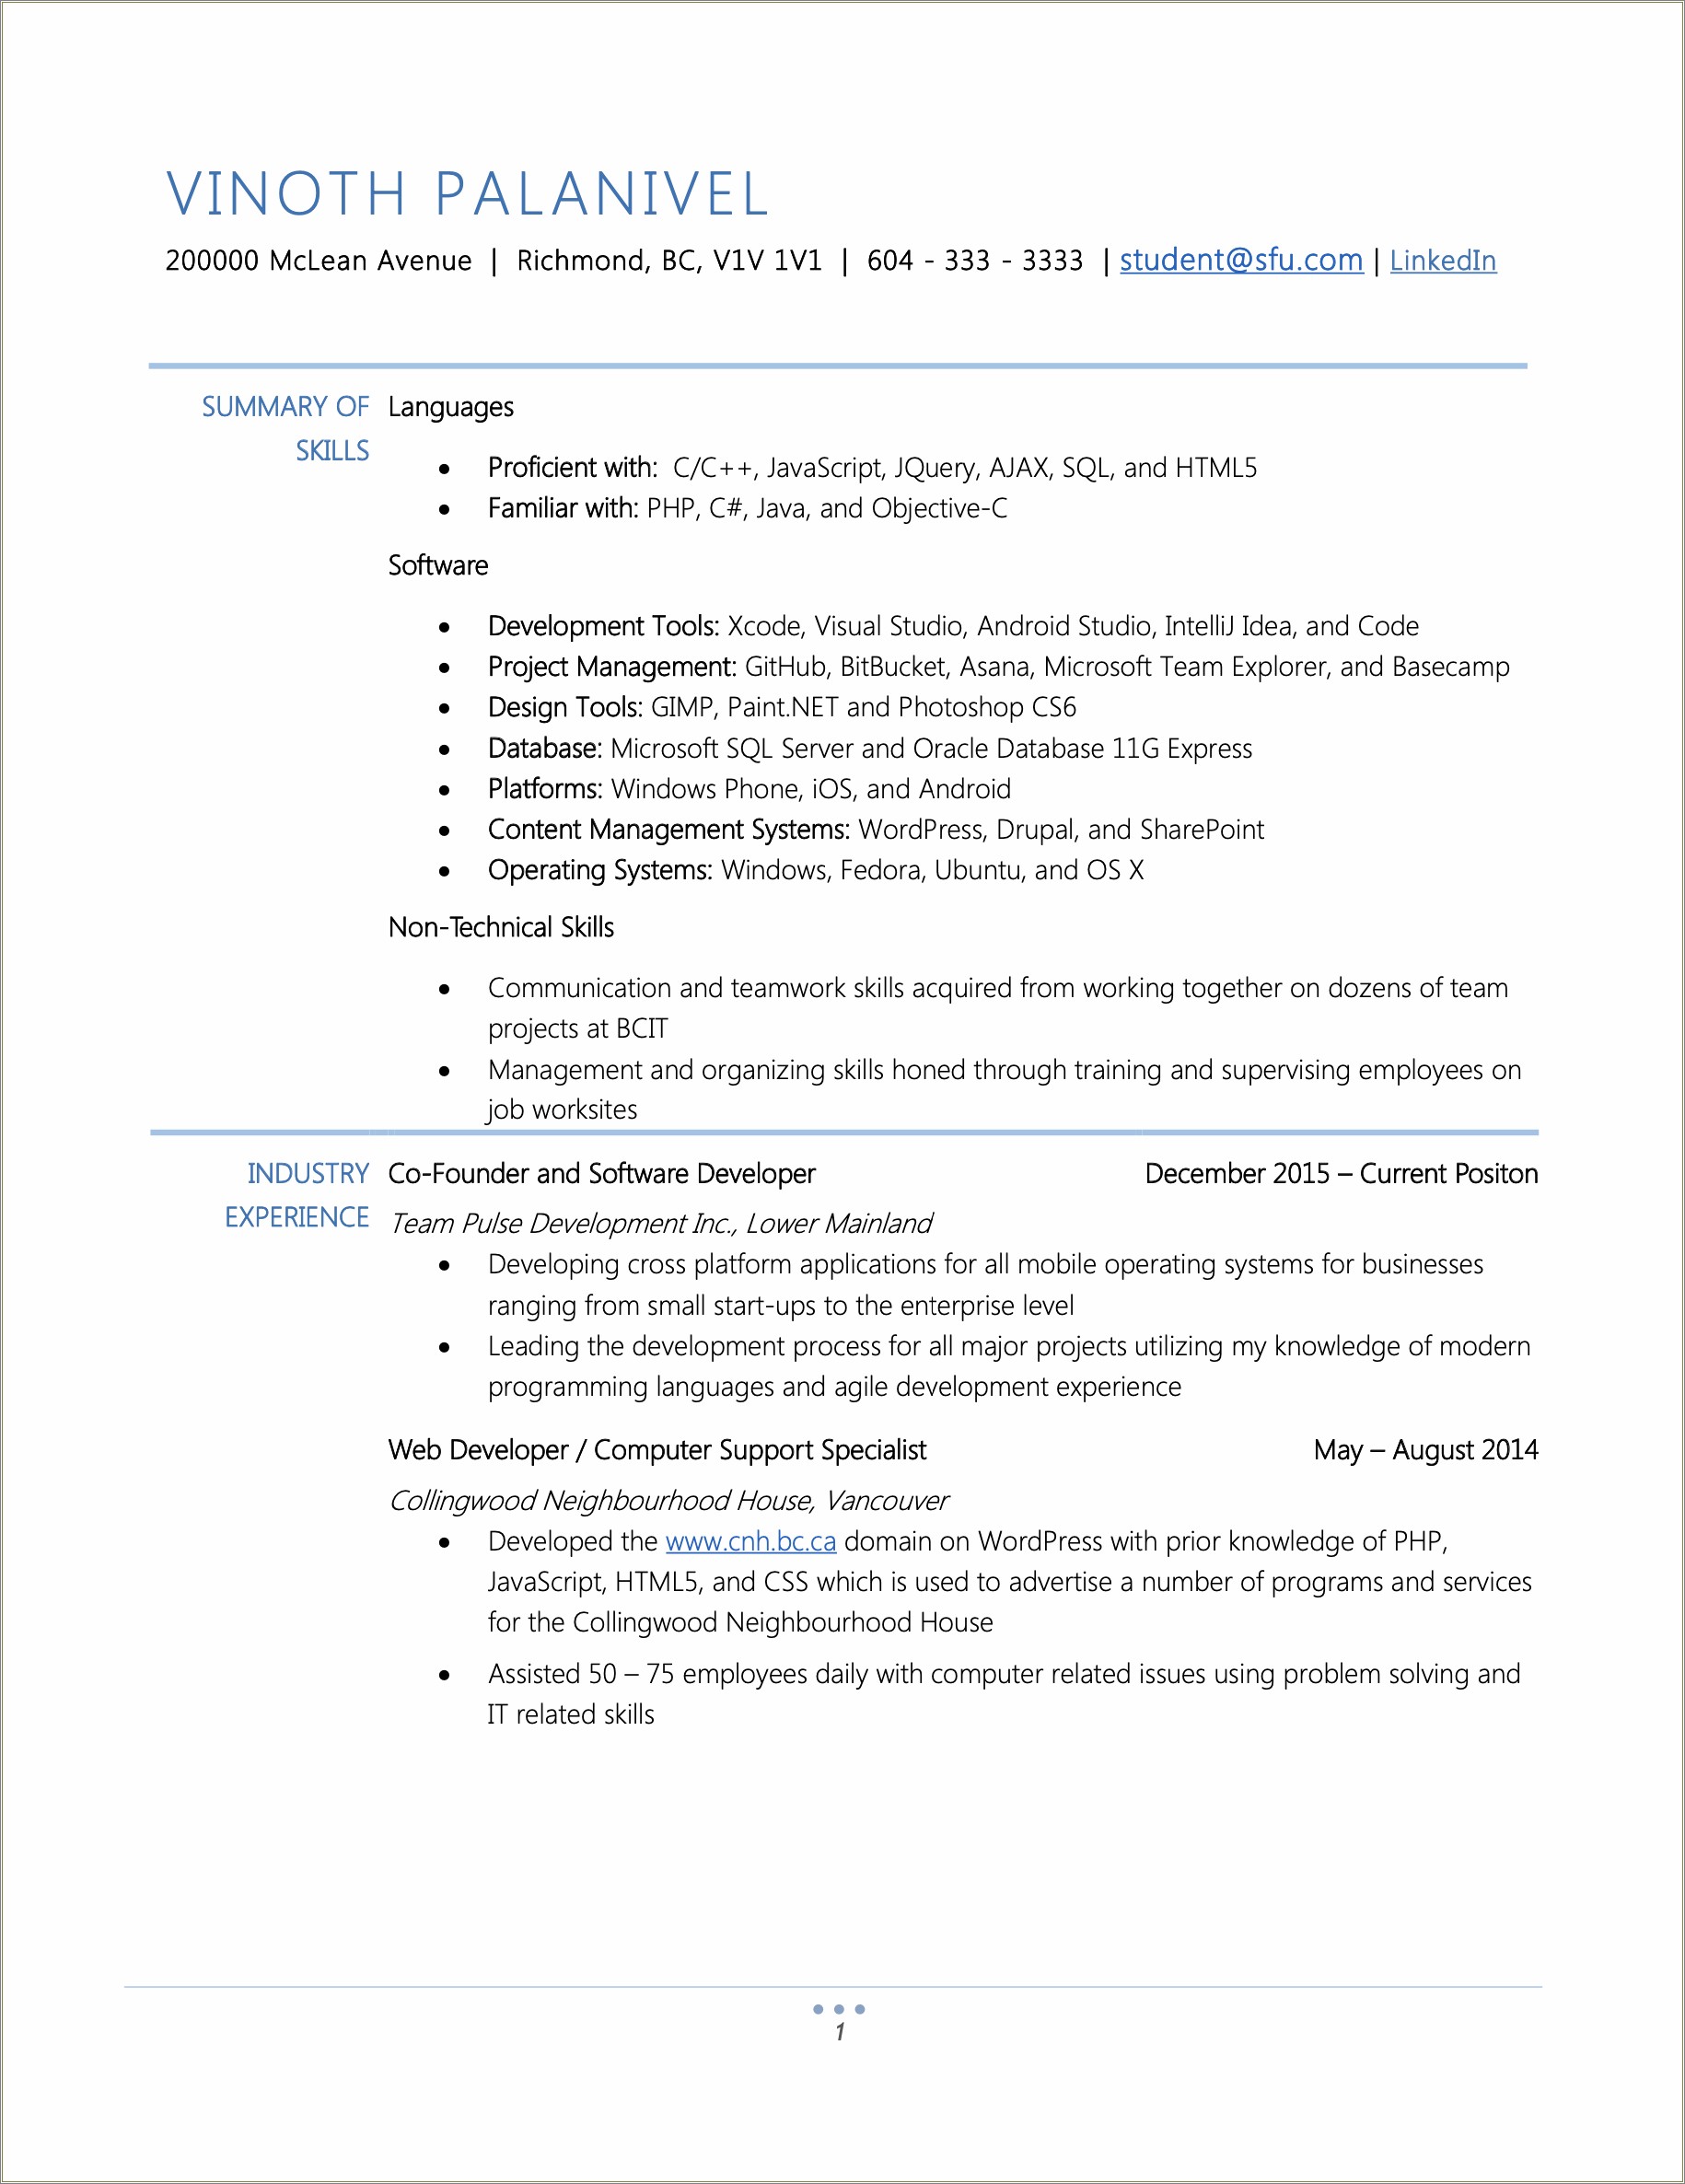 Sample Of Resume Of Computer Science